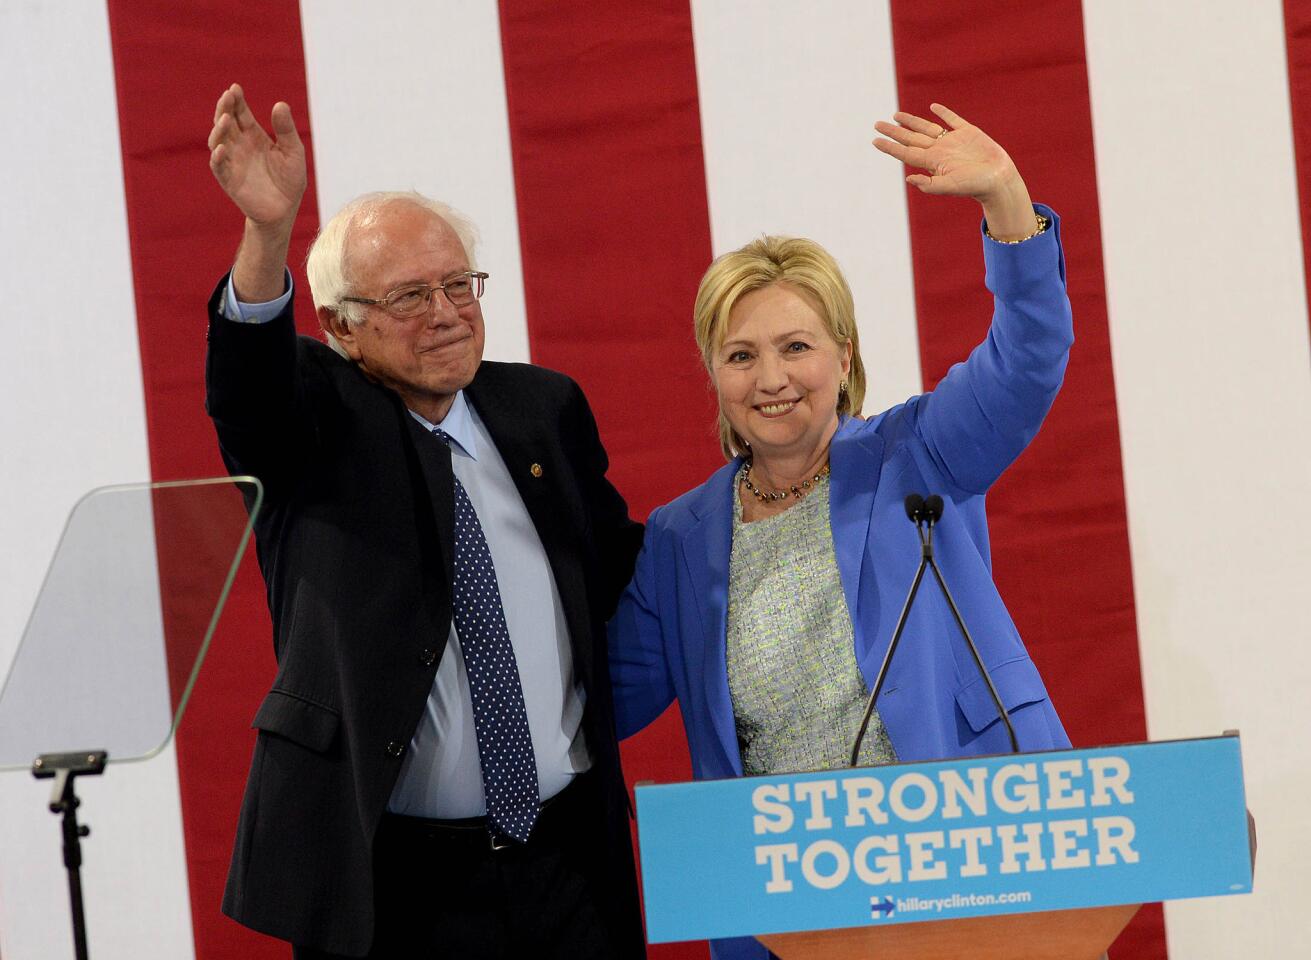 Bernie Sanders and presumptive Democratic presidential nominee Hillary Clinton appear together at Portsmouth High School on July 12, 2016, in Portsmouth, New Hampshire.